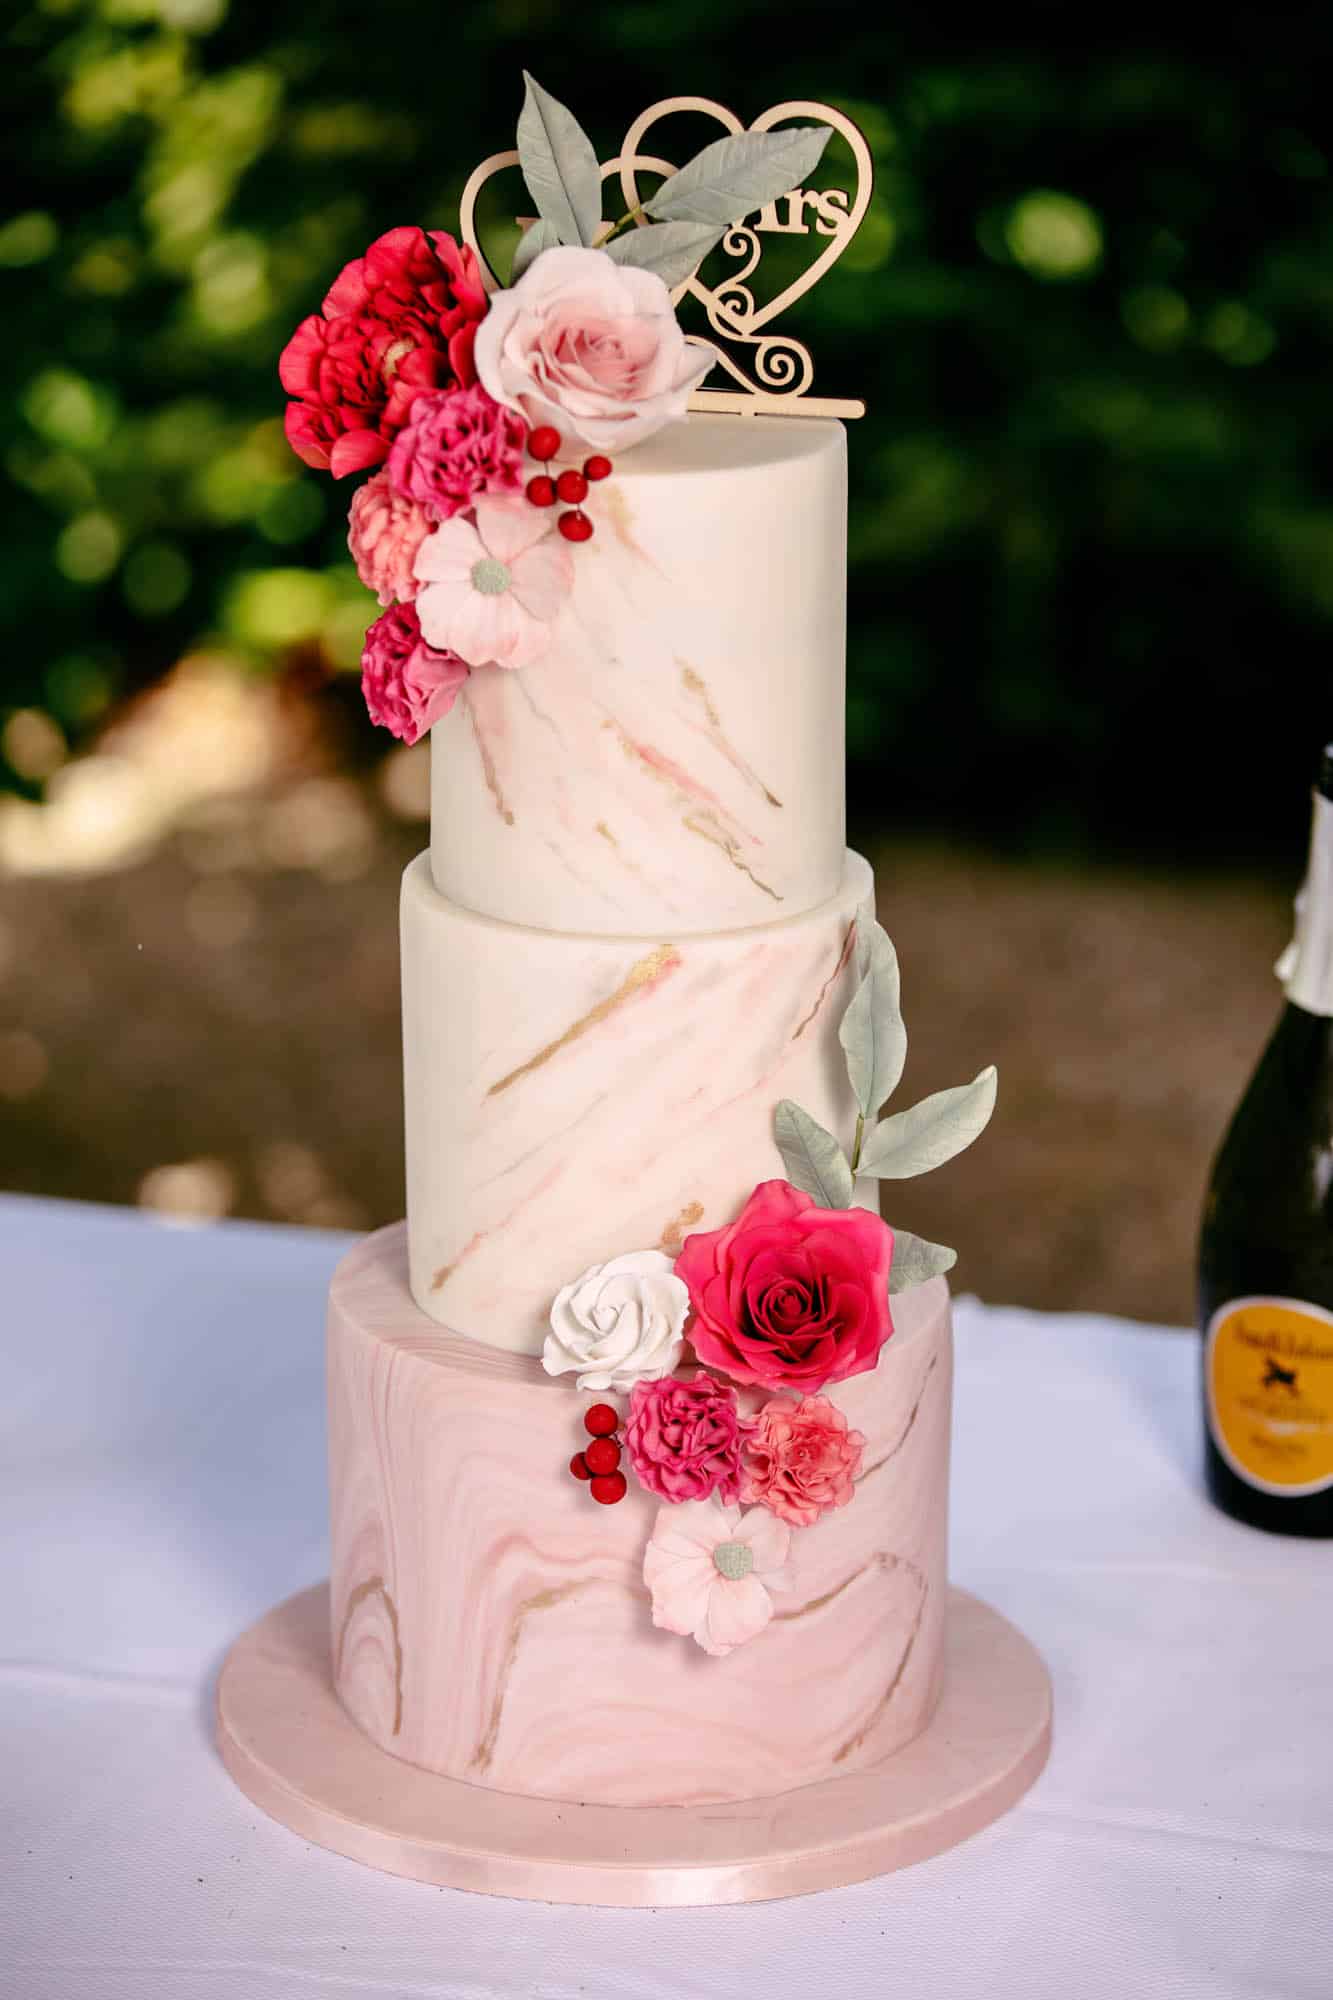 A beautifully decorated wedding cake with three layers and pink flowers on top, perfect for wedding cakes.